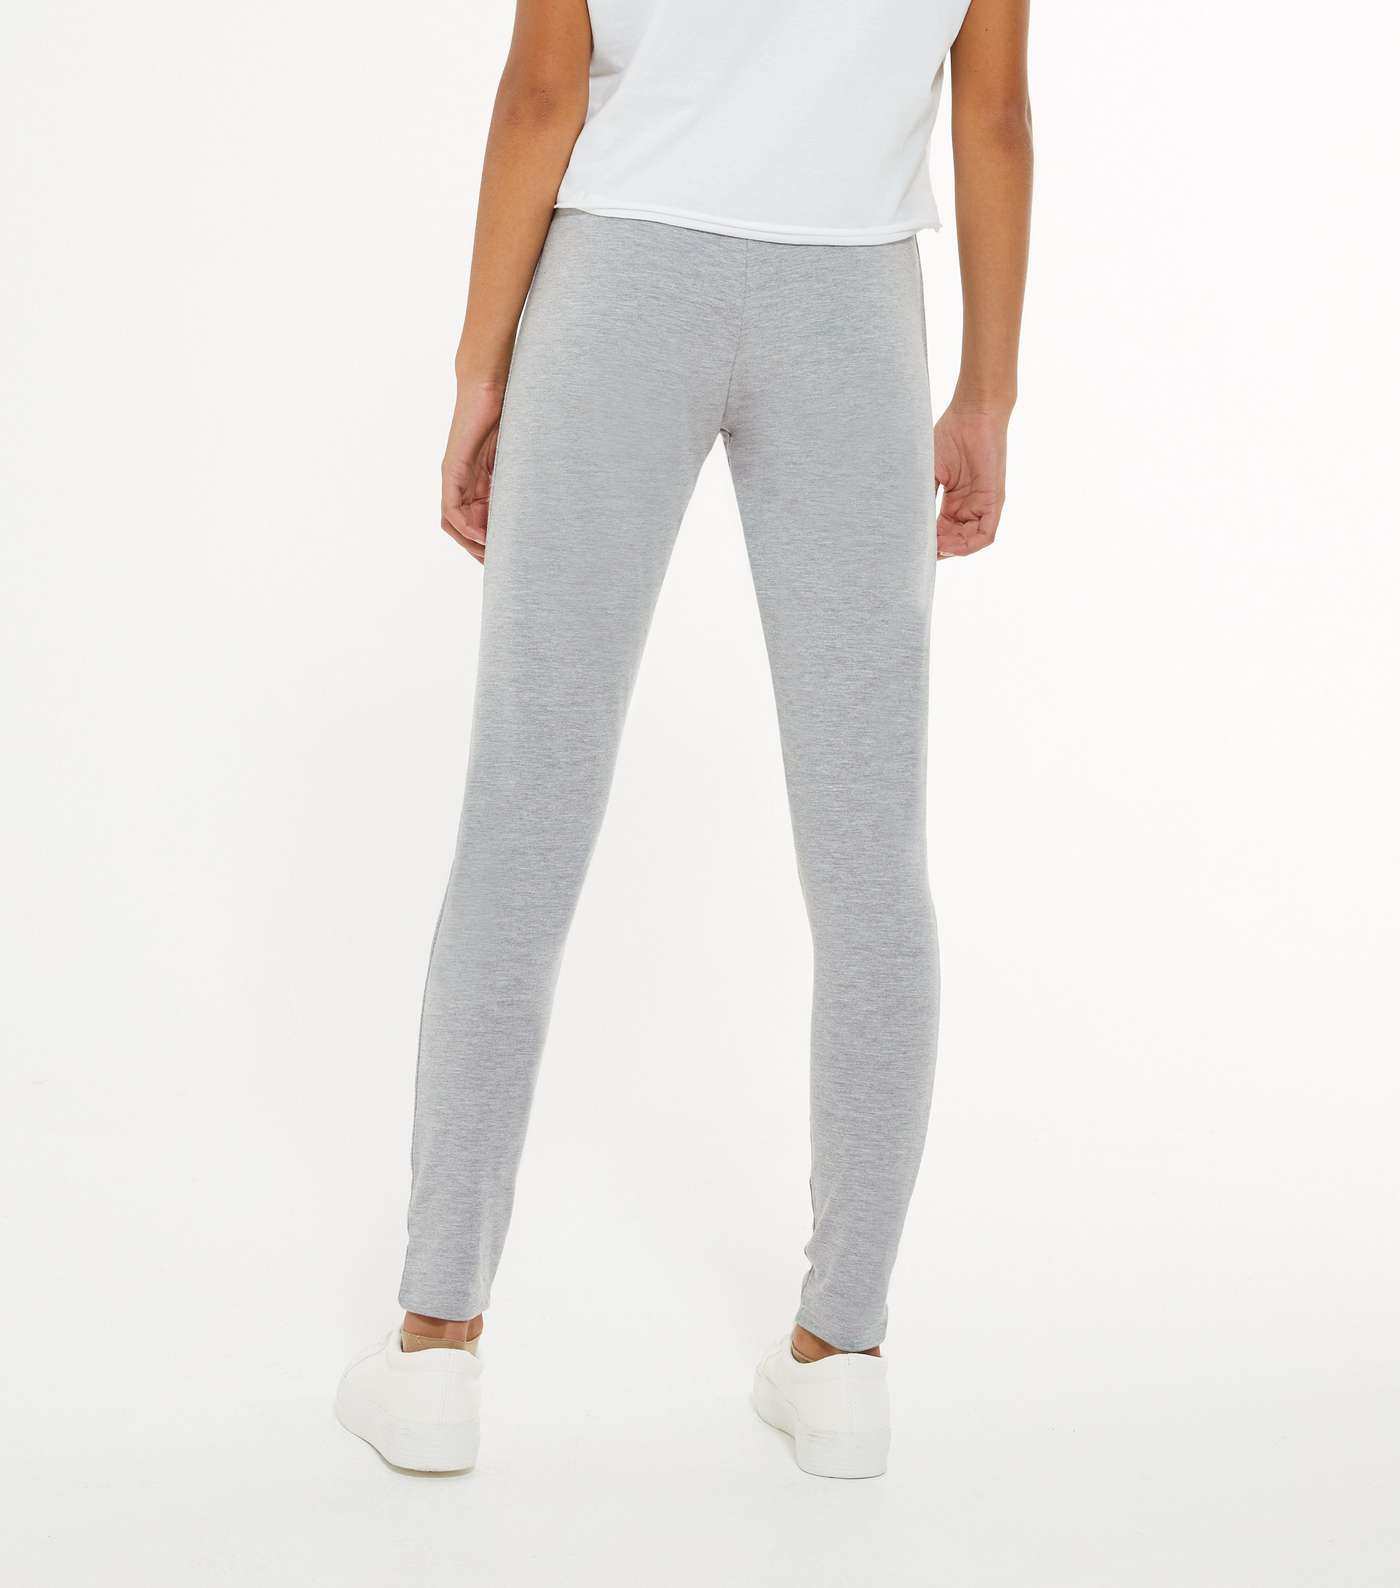 Grey Mid Waist Leggings, Casual Wear, Skin Fit at Rs 120 in New